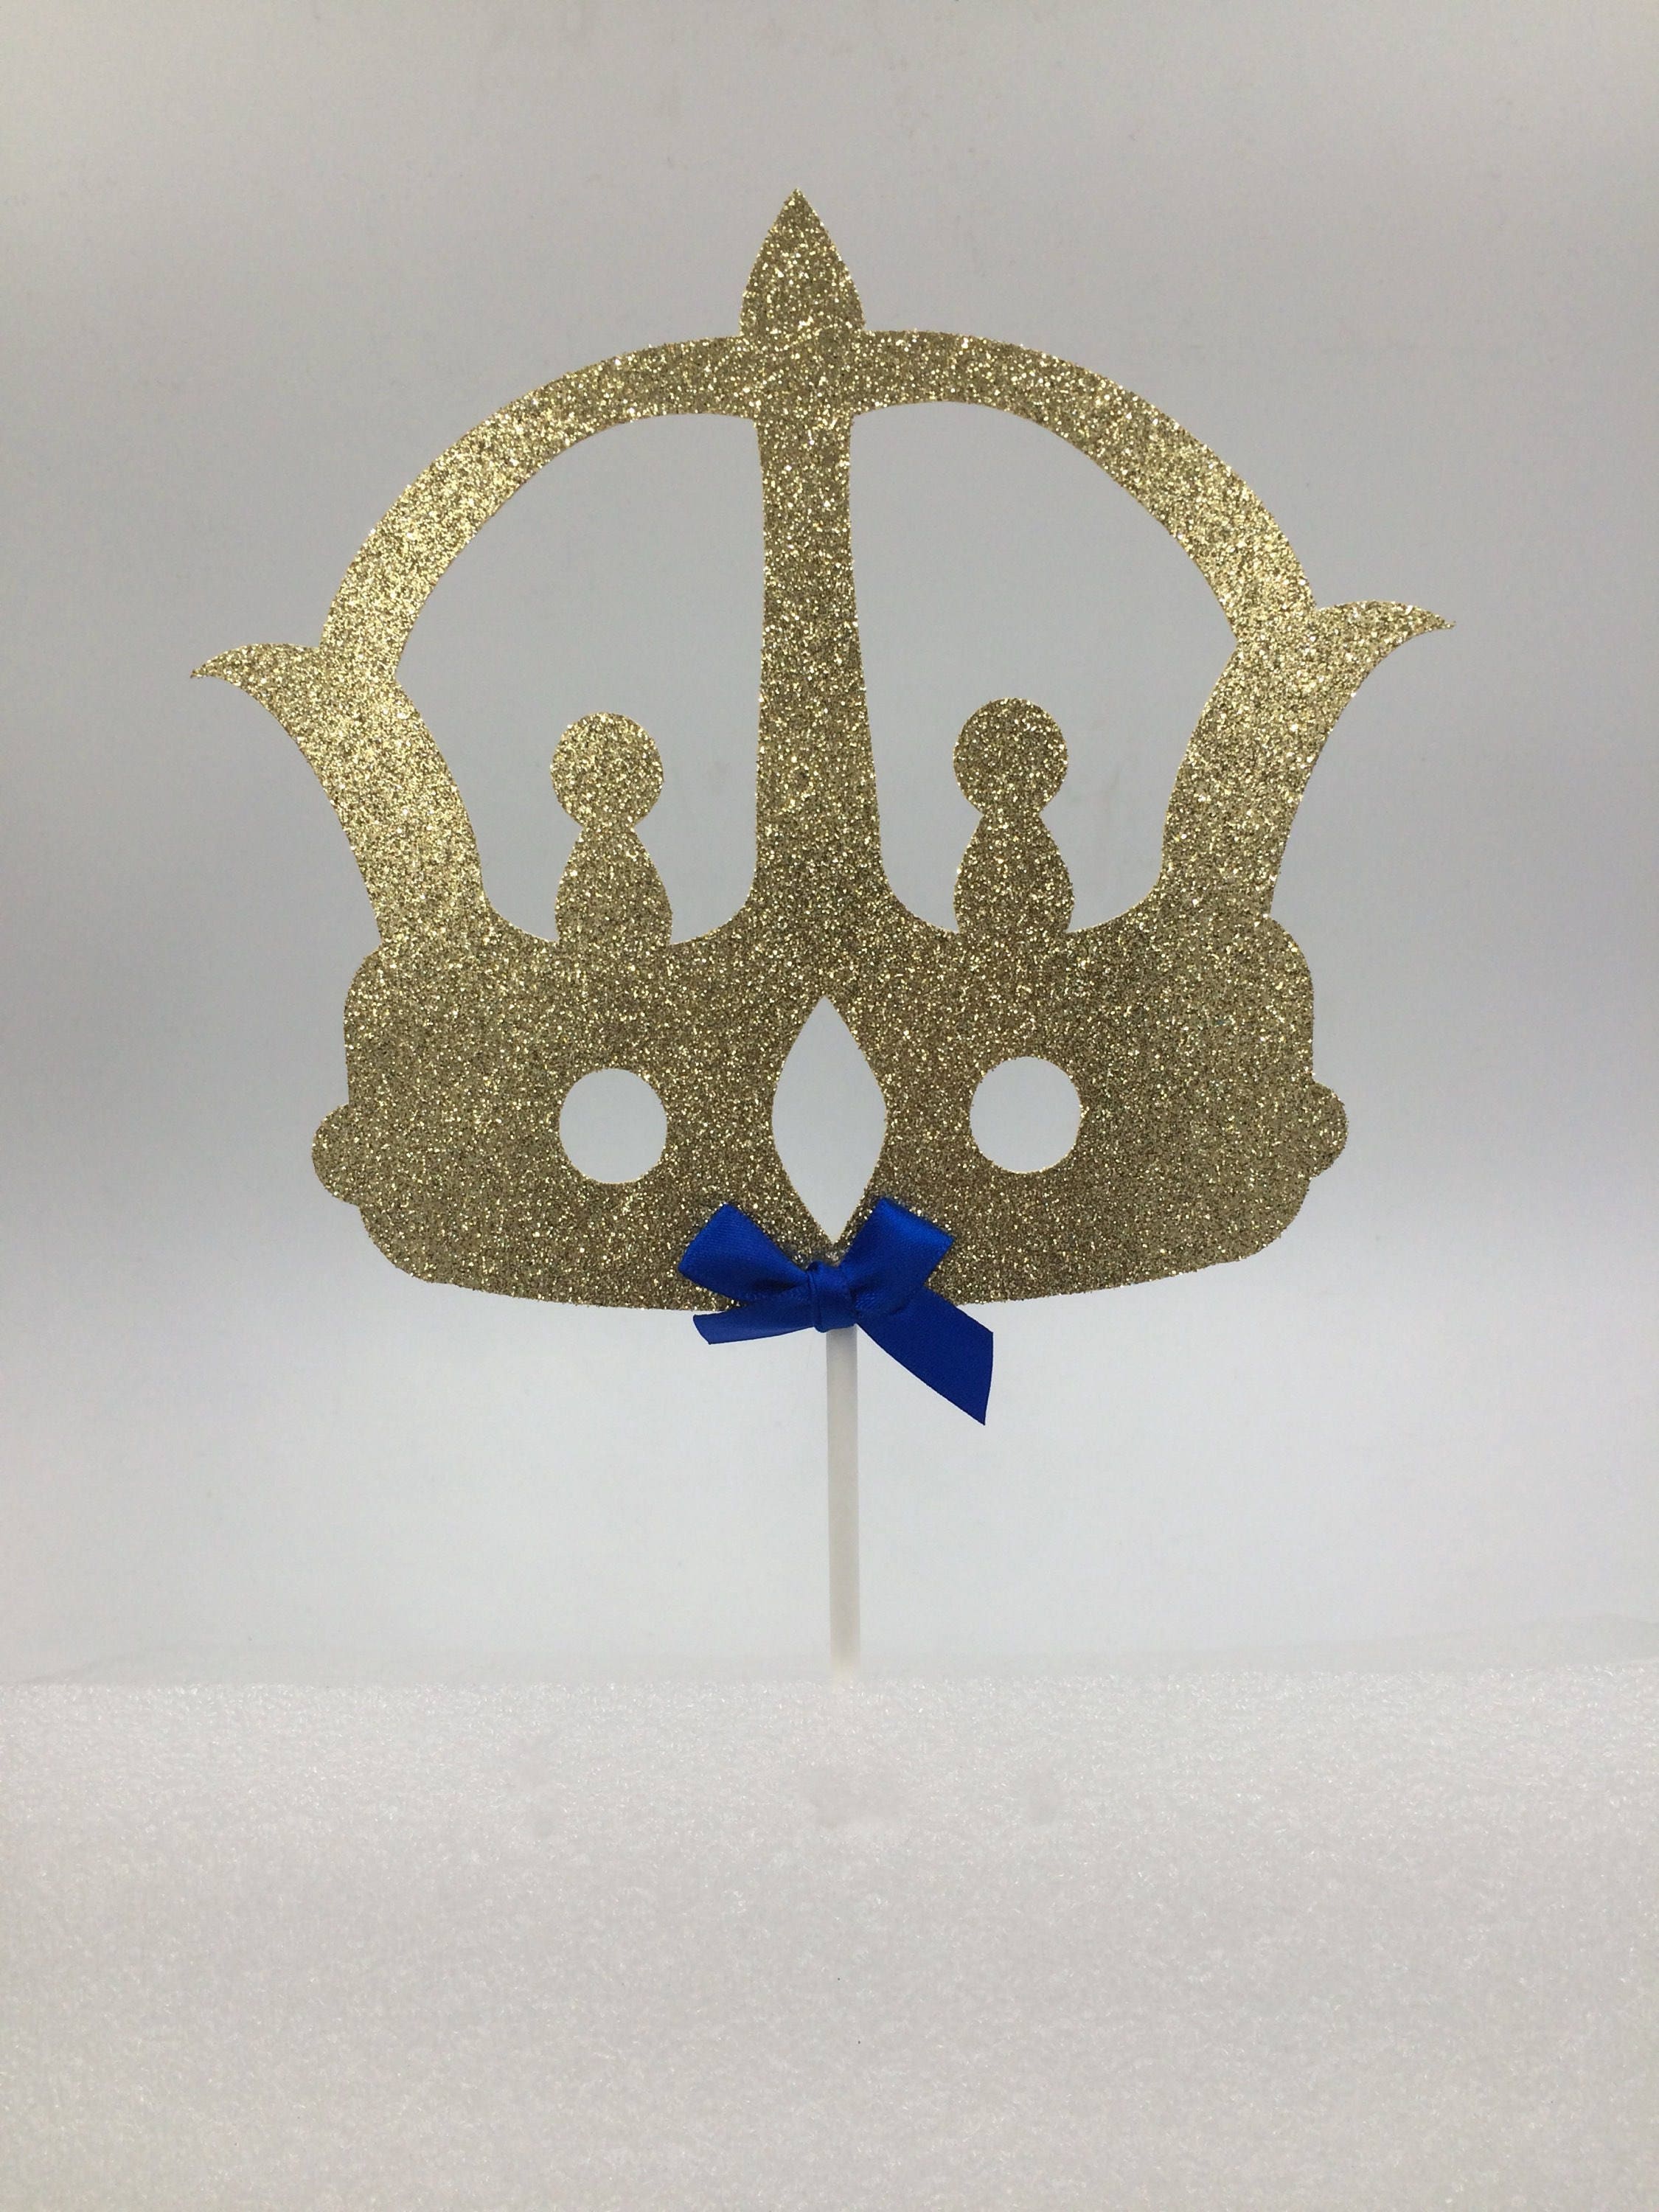 Gold Glitter & Royal Blue Crown Cake Topper Fits 6 to 8 Size Cakes Crown  Cake Pick Crown Cake Topper Ready to Ship 